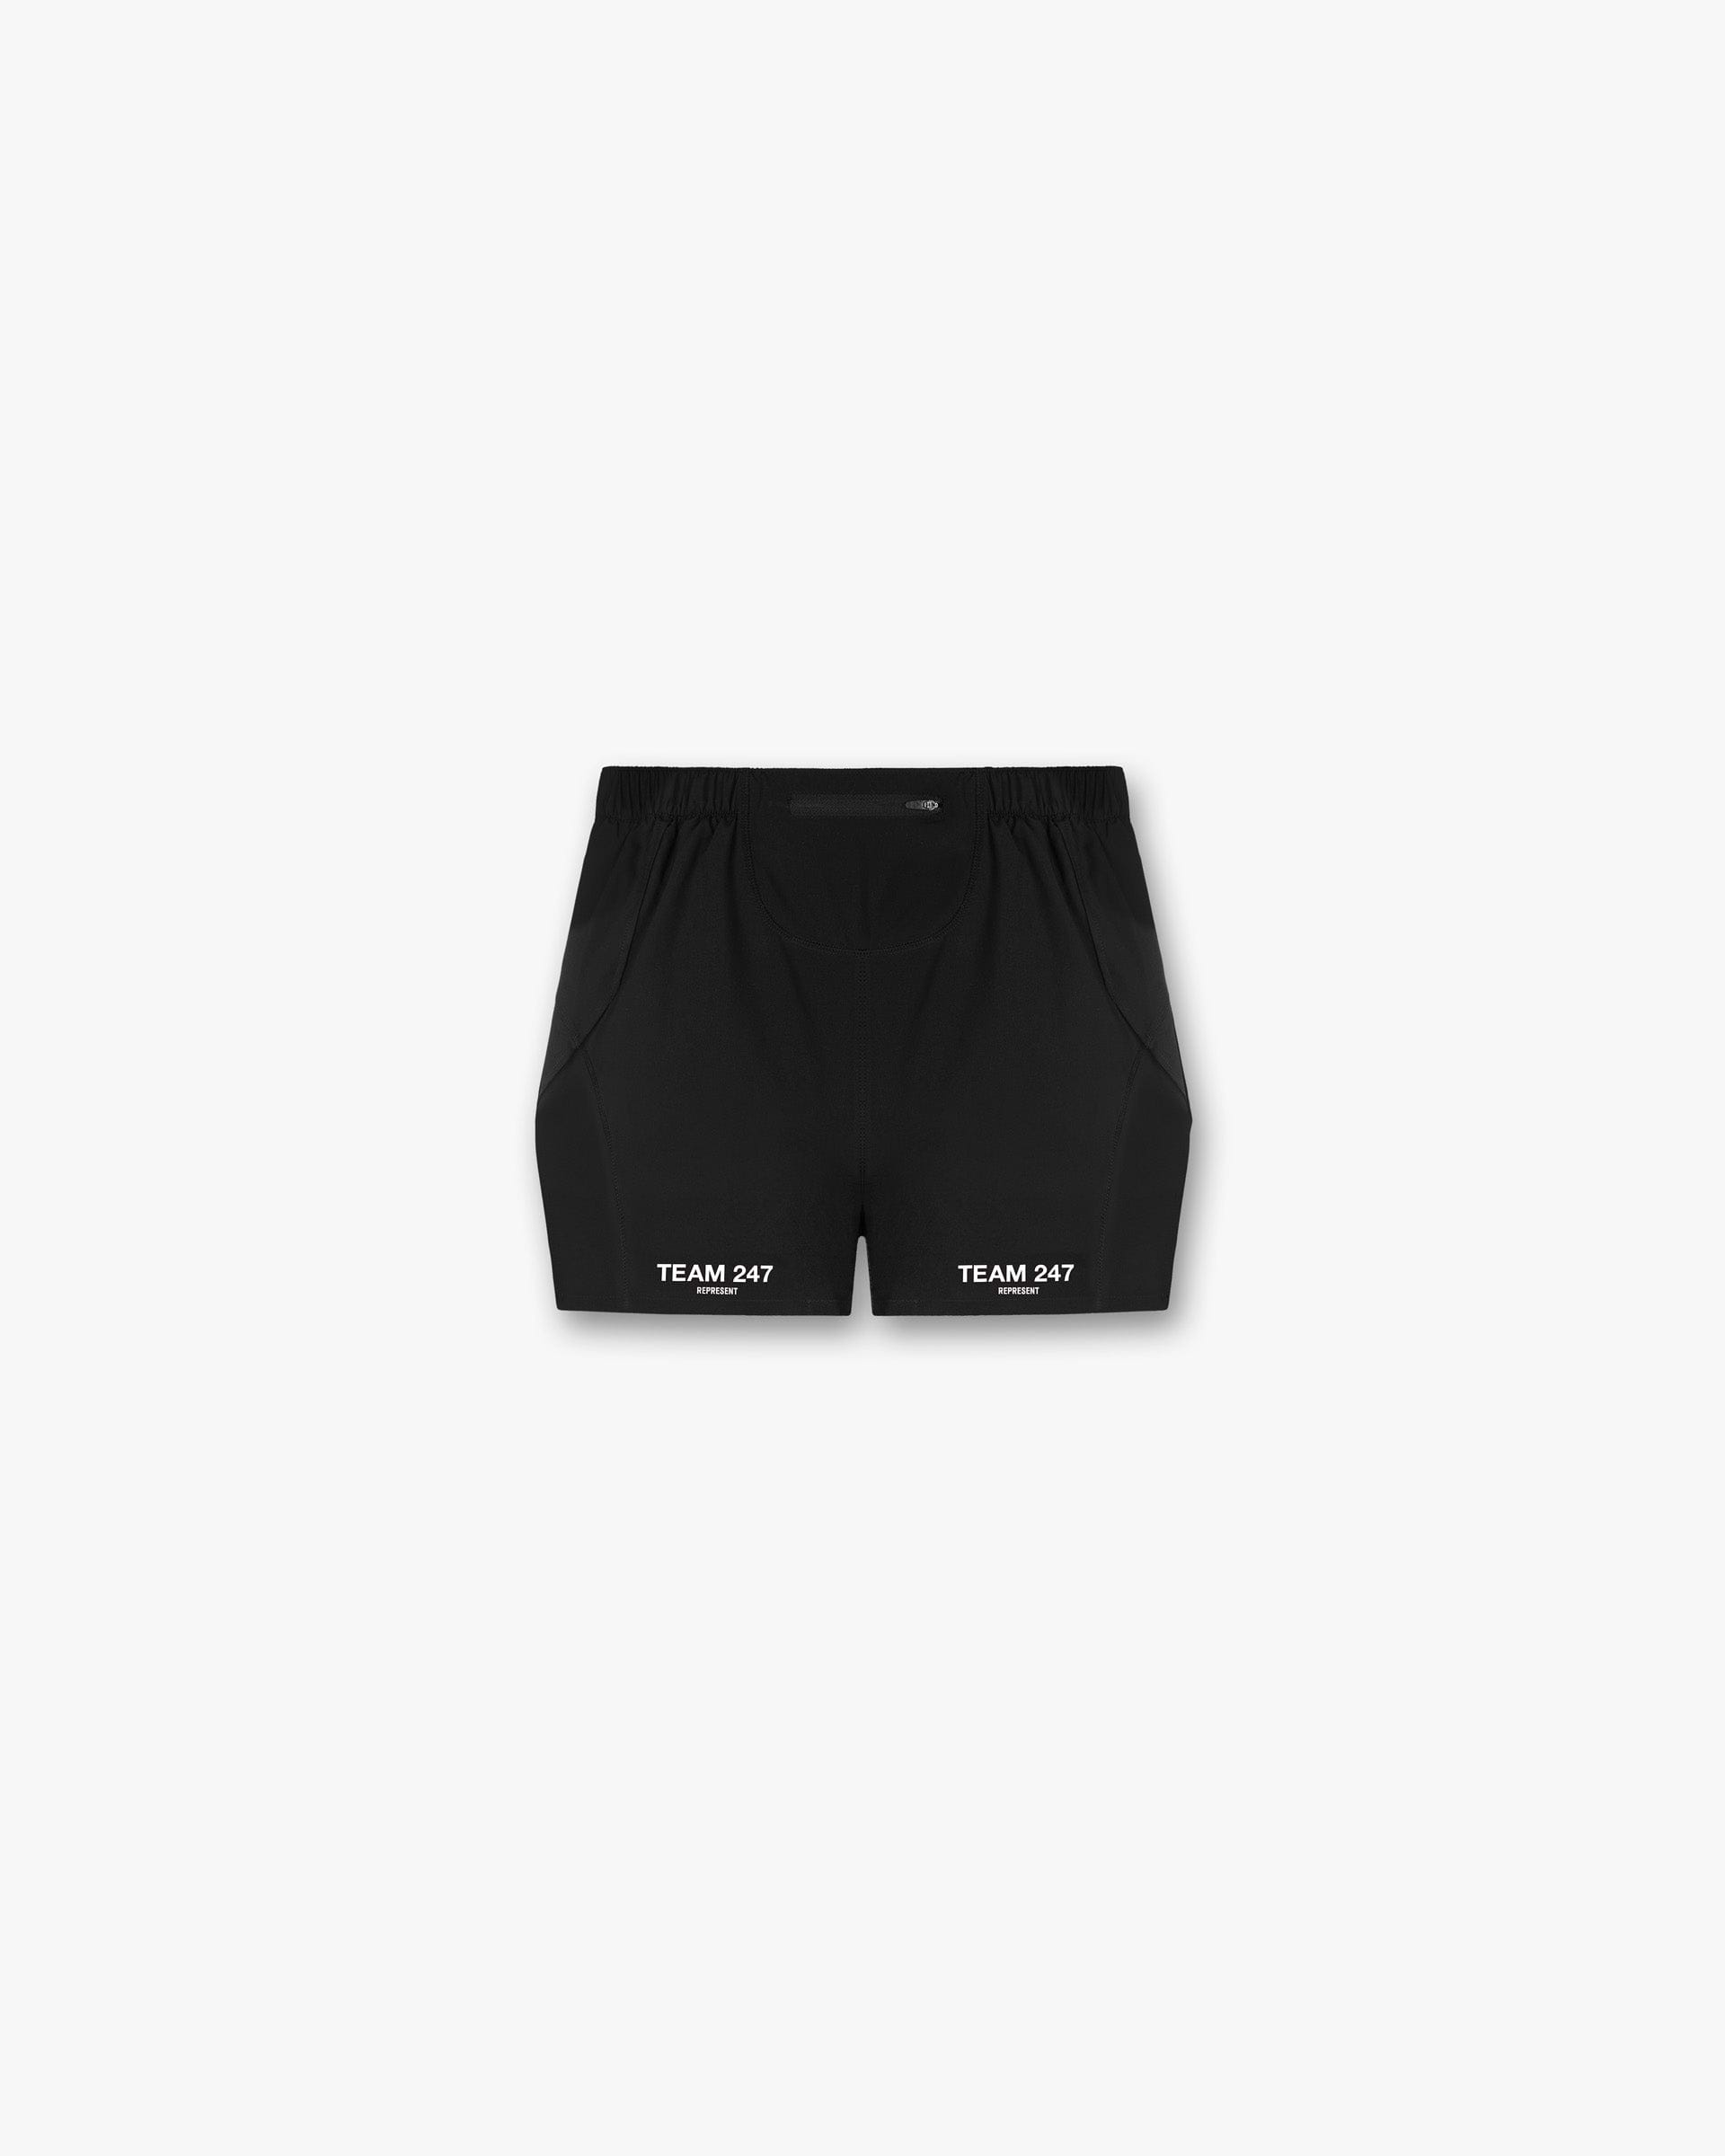 NEW Represent Shorts* REVIEW! ALL COLORS 9$ each 🤑 (Size M) : r